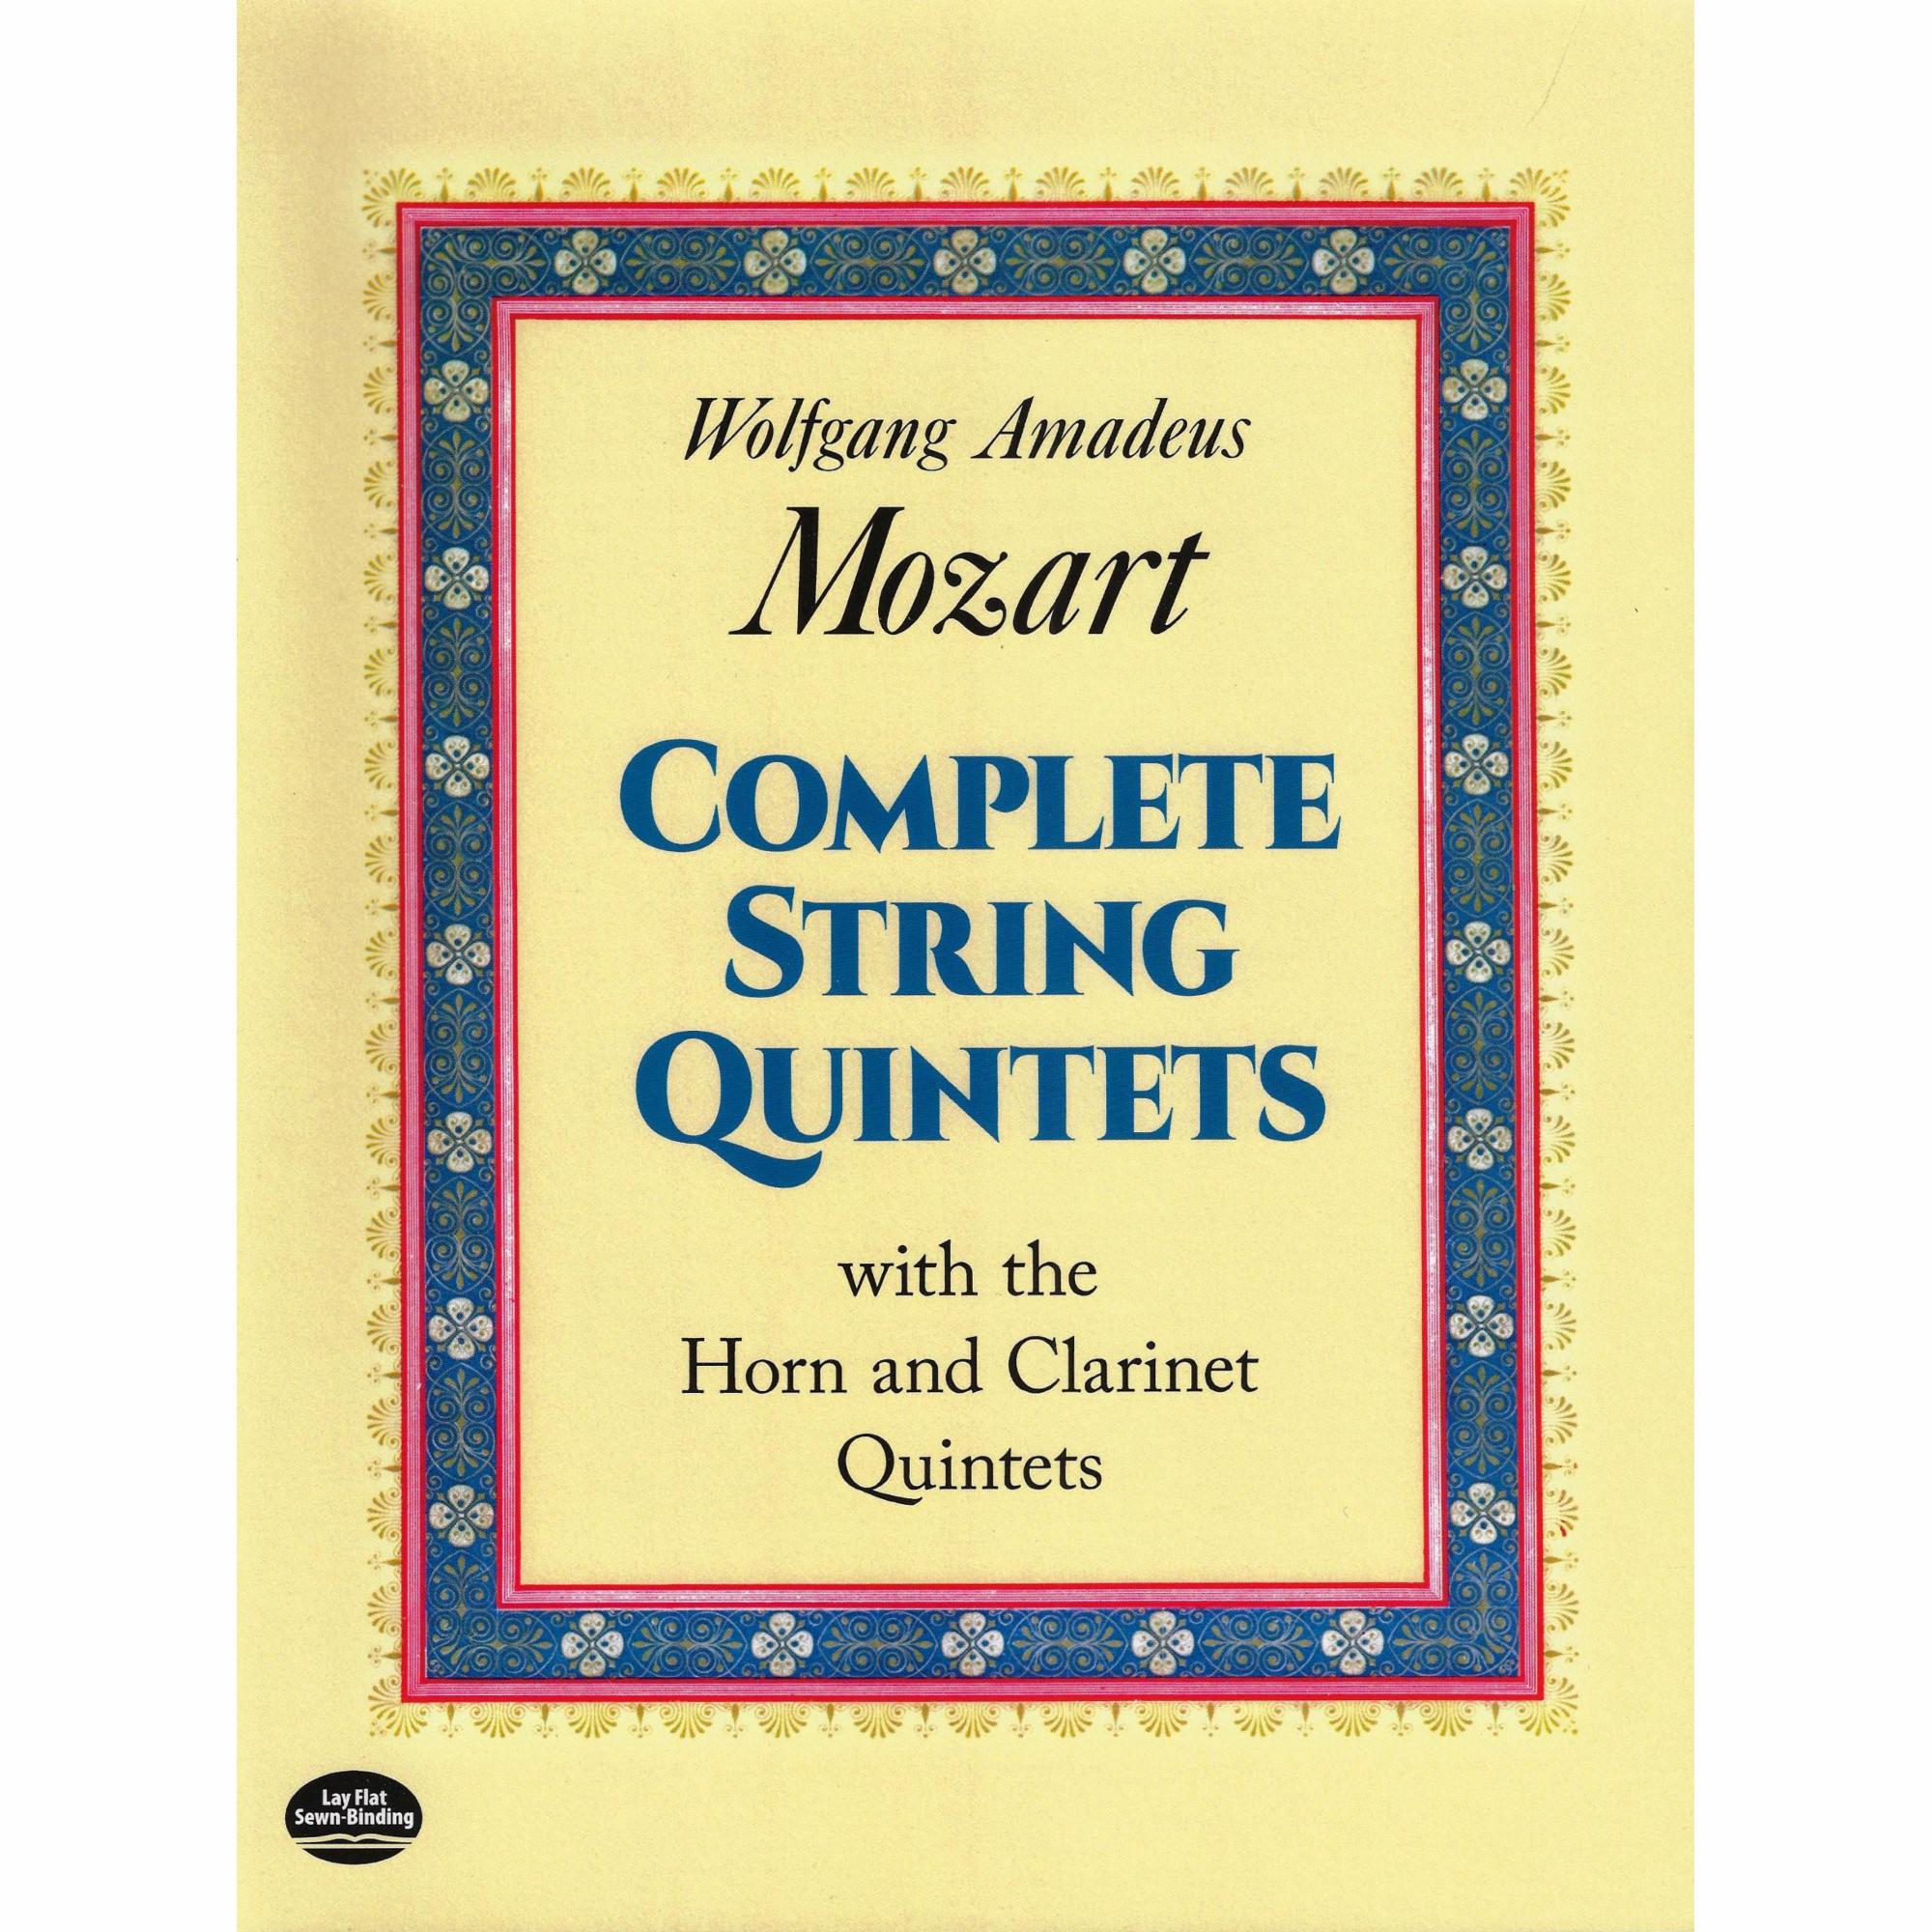 Mozart -- Complete String Quintets with the Horn and Clarinet  Quintets